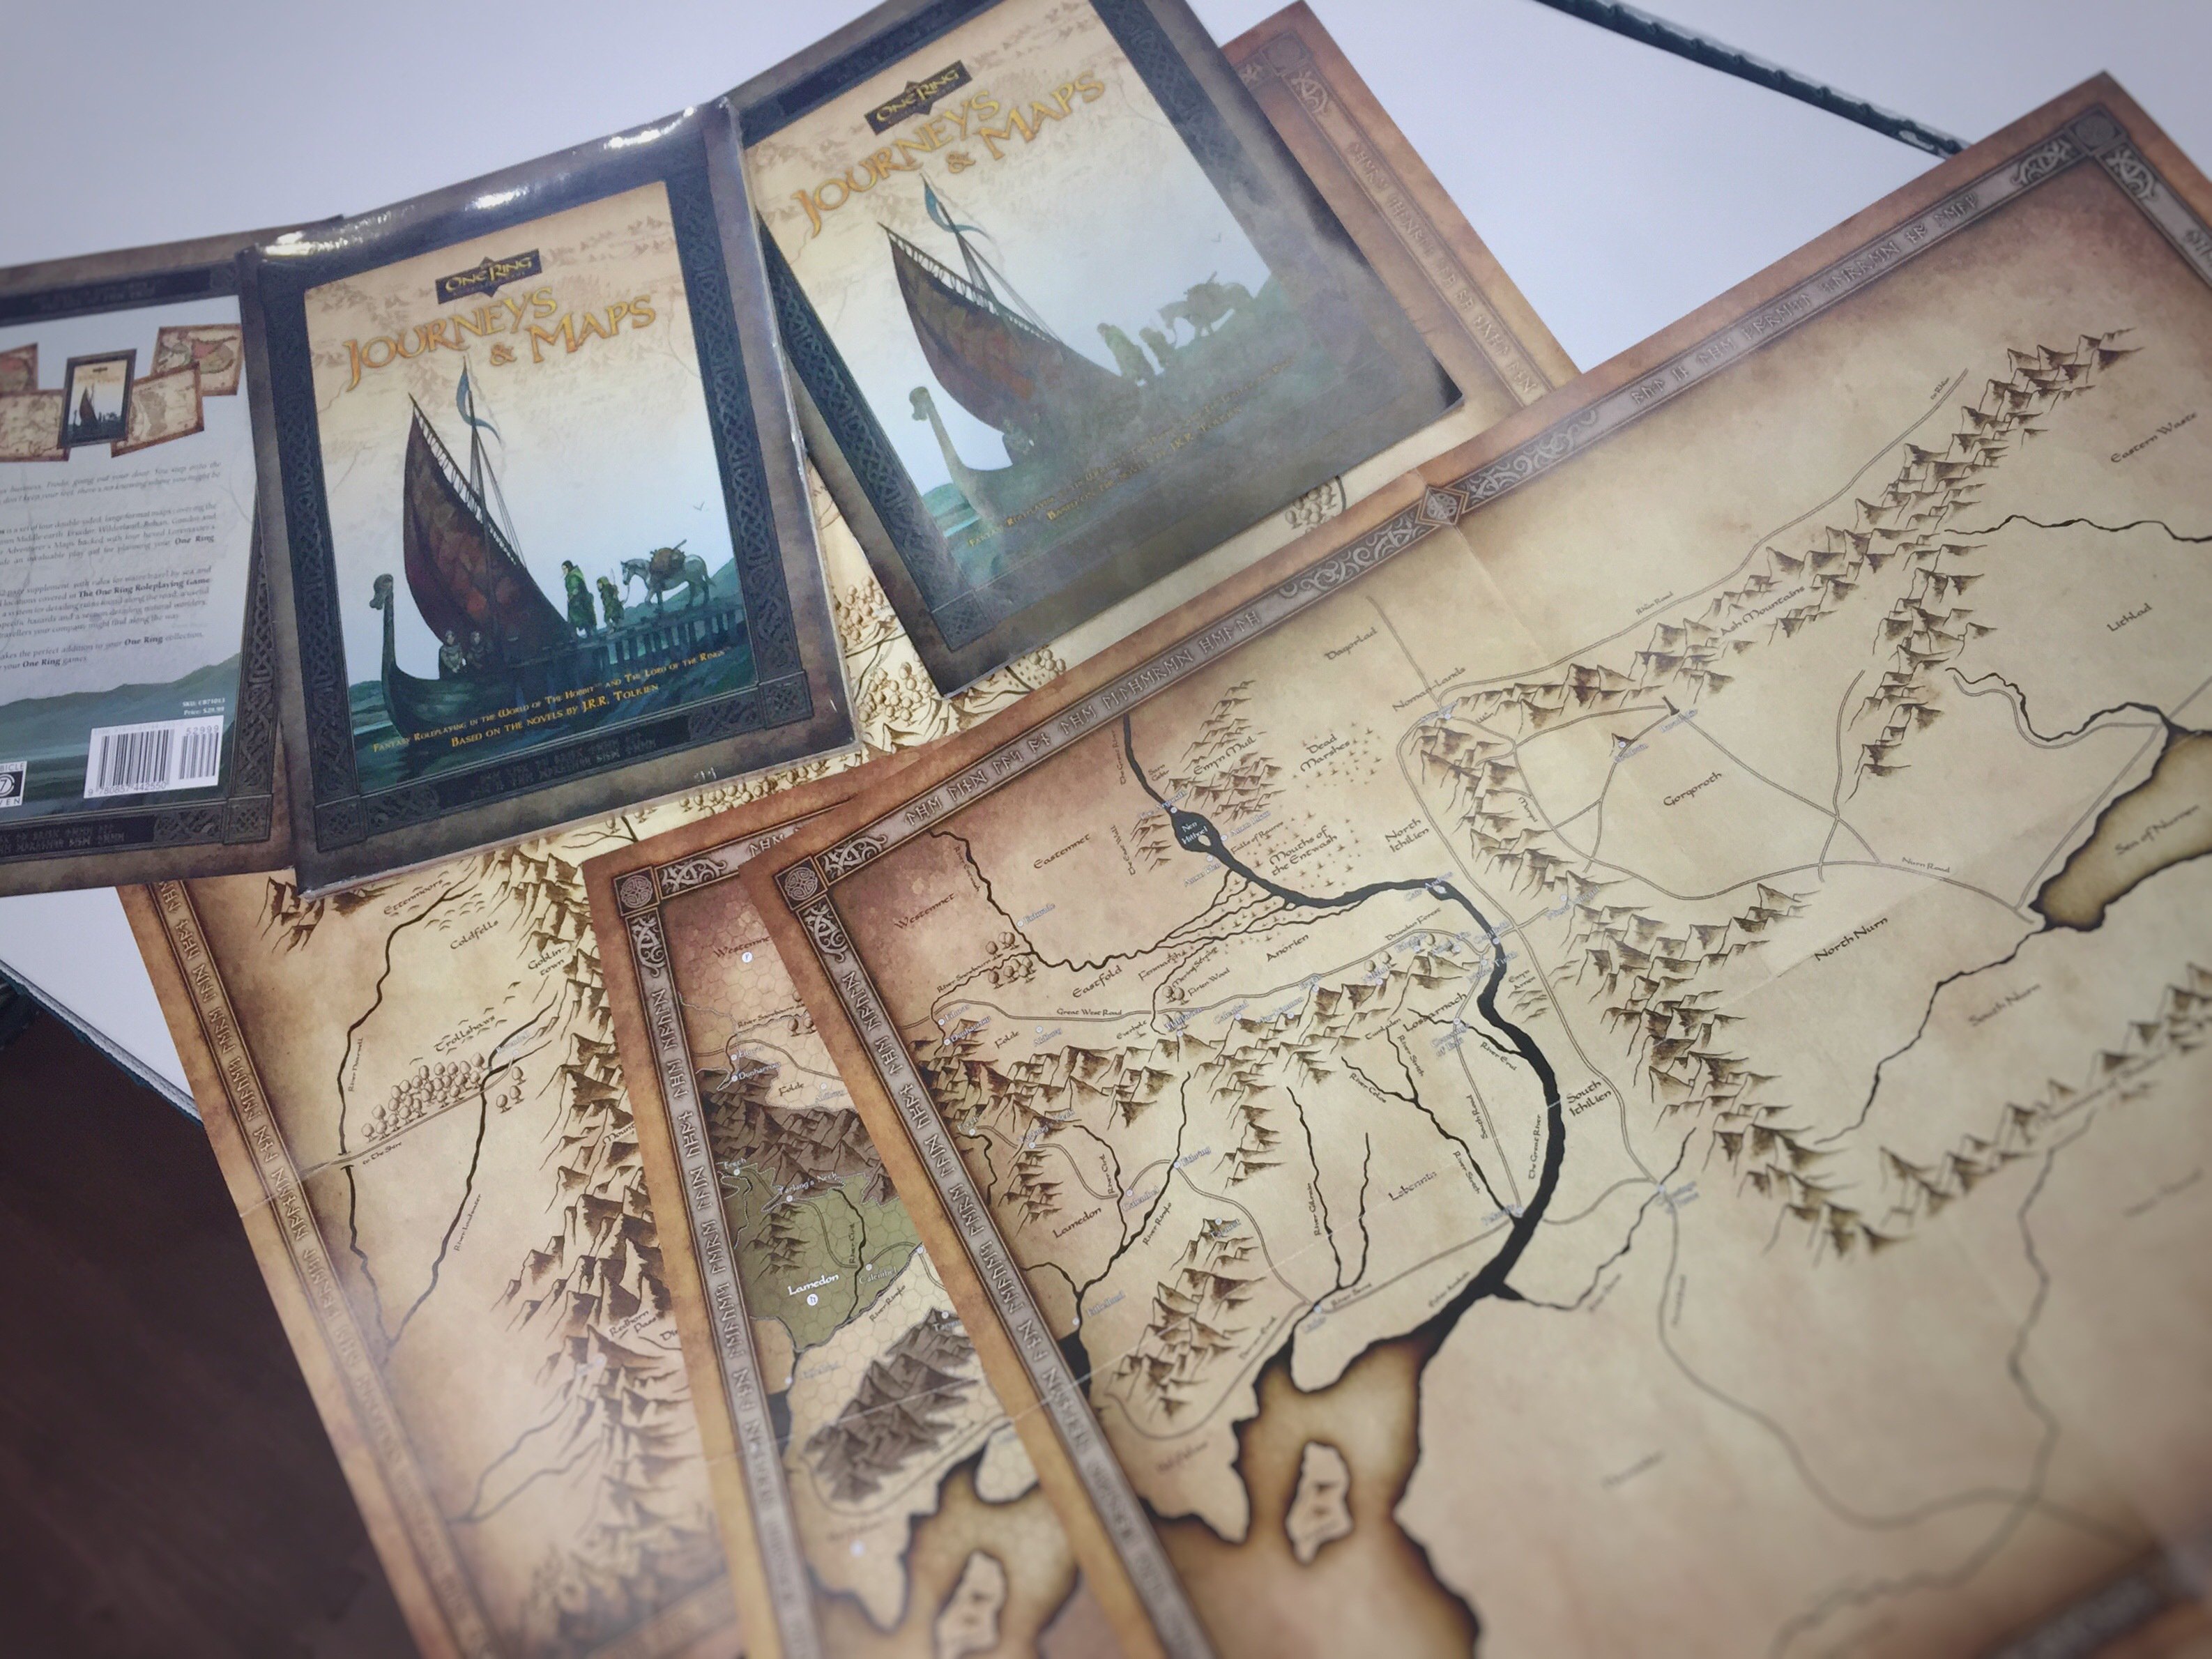 Snikken Compliment Hoofdkwartier Cubicle 7 on Twitter: "We have two advanced preview copies of Journeys and  Maps for The One Ring at our #gencon booth. Gorgeous!  https://t.co/2EooxOISCS" / Twitter